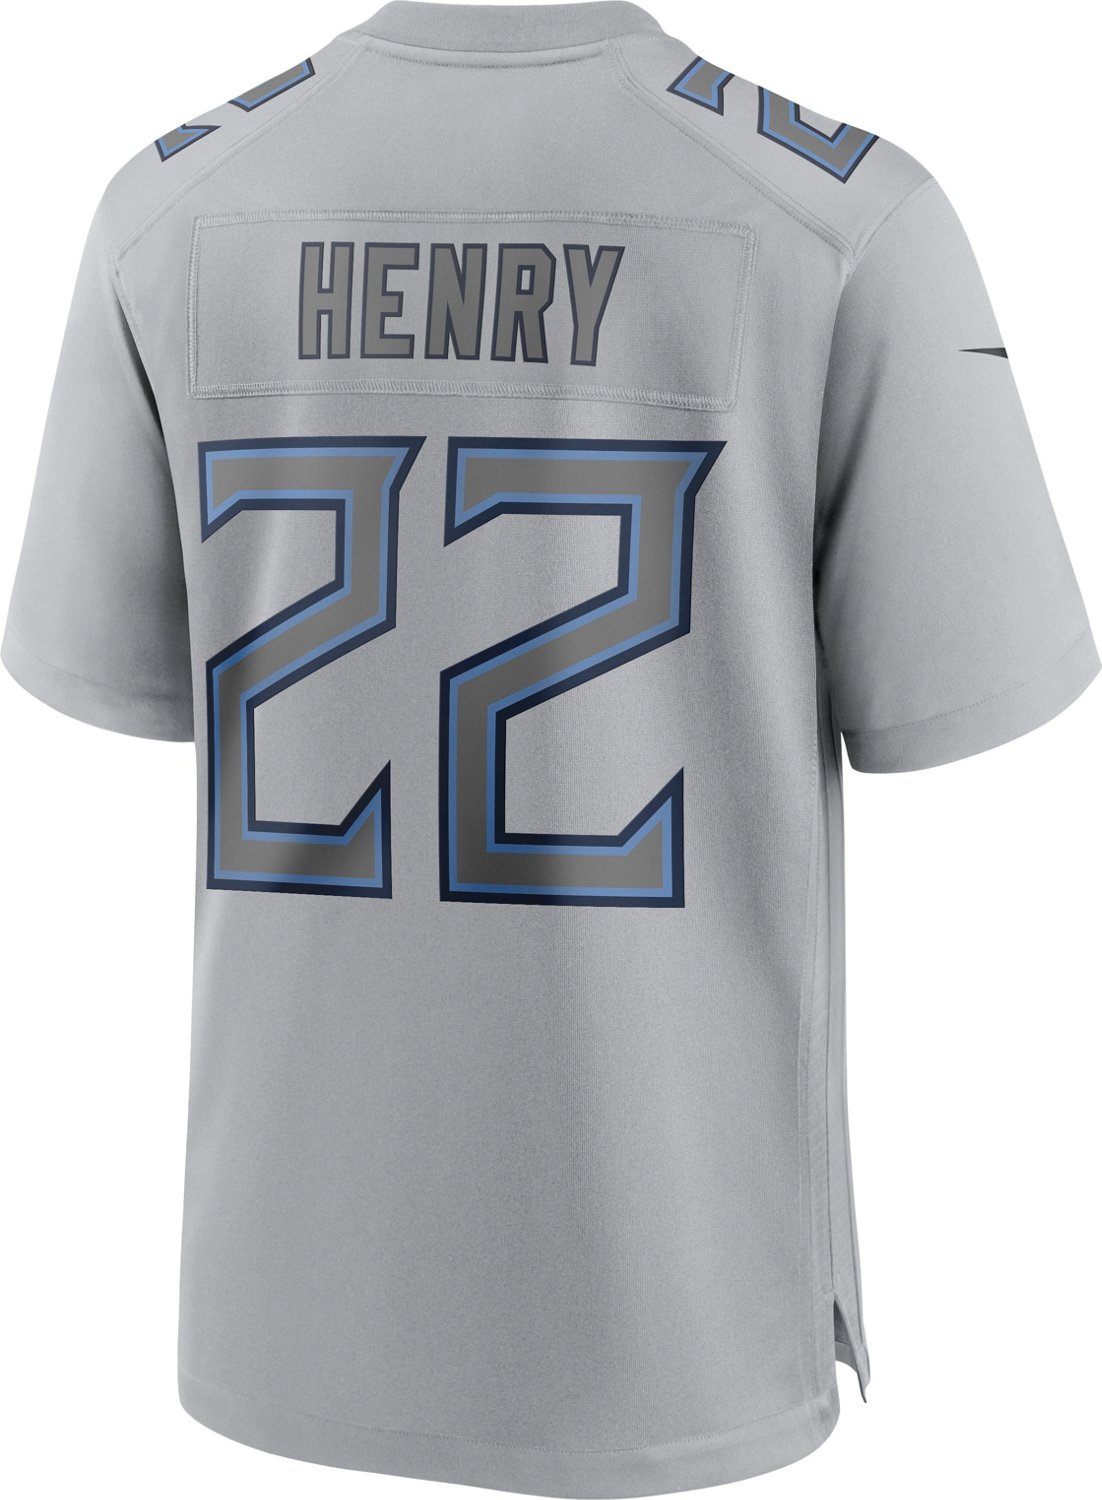 Nike Men's Tennessee Titans Atmosphere Derrick Henry #22 Fashion Jersey ...